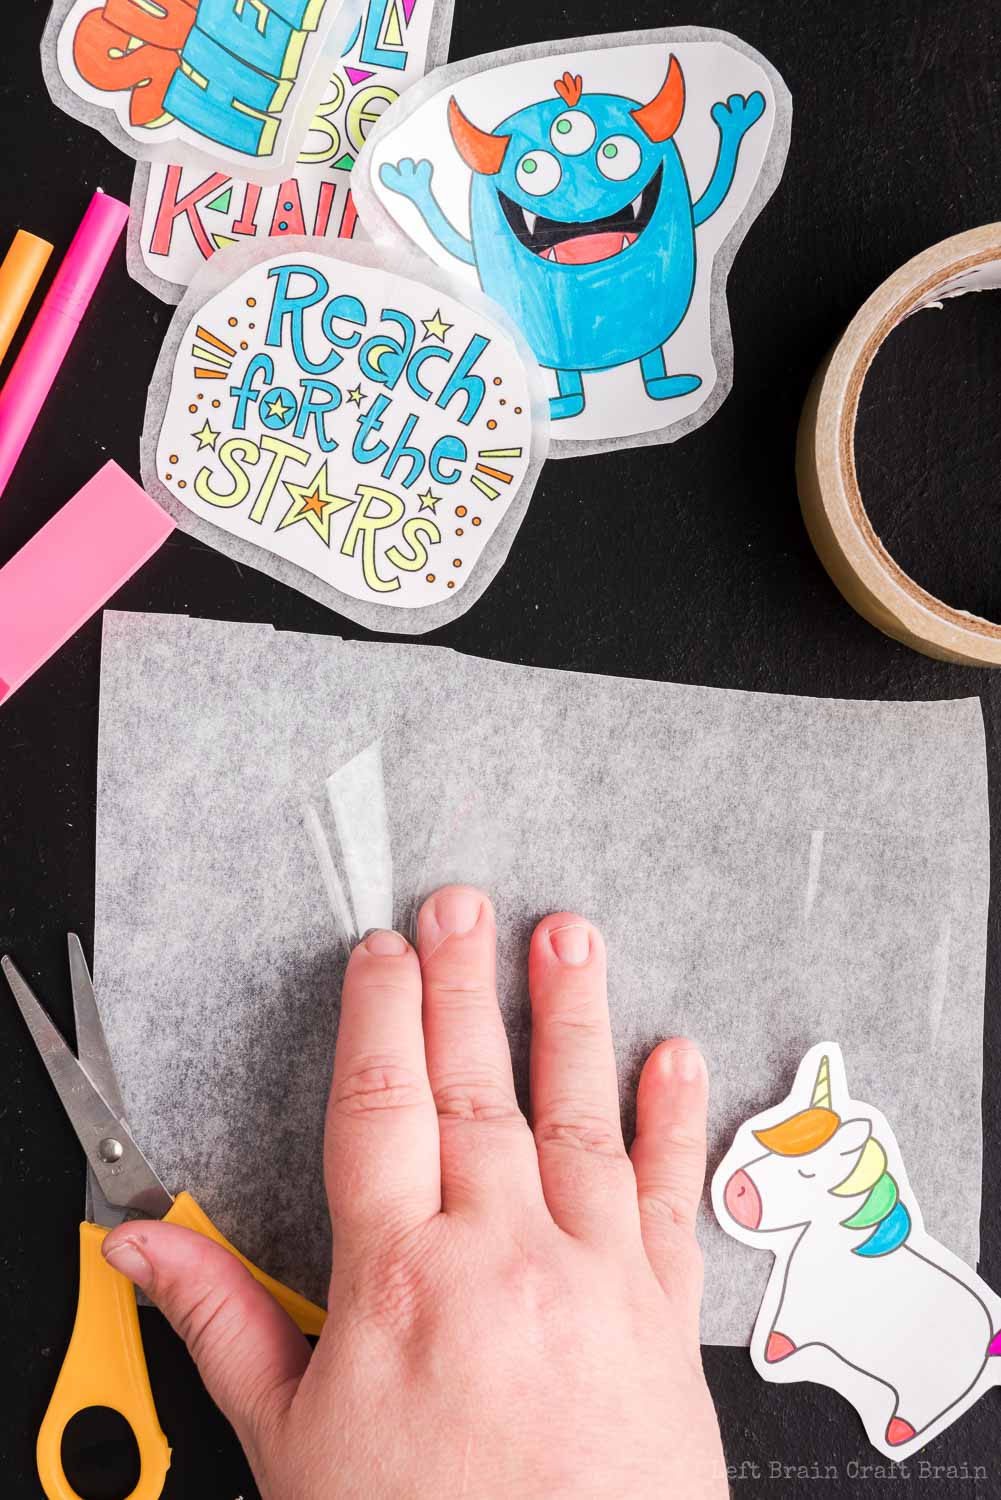 Place first layer of tape for stickers - Make your own DIY stickers with a super easy process using basic supplies. Kids will love this activity. They're fun to add to presents, too.